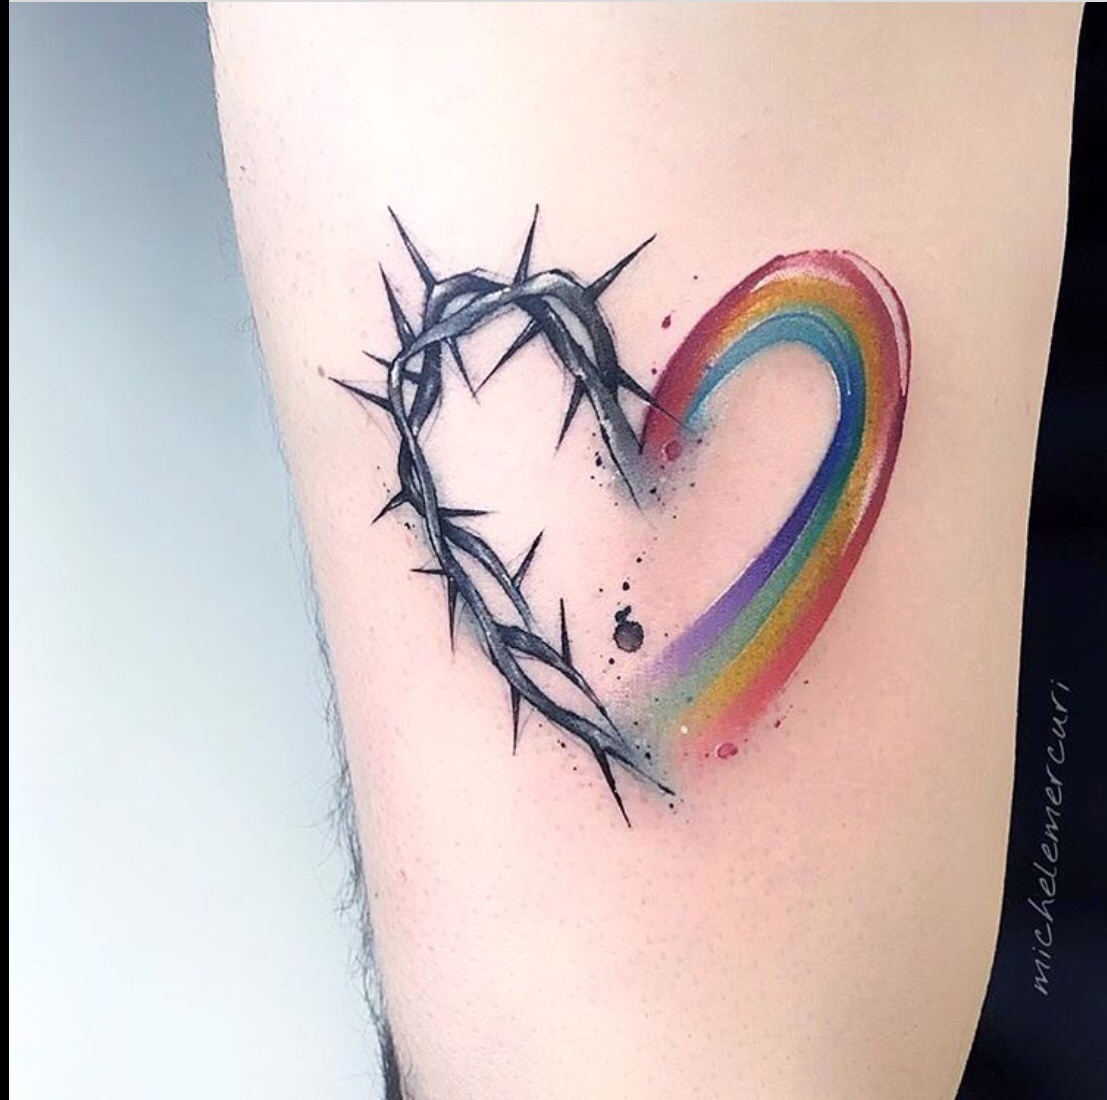 Broken Heart Tattoo Meaning The Significance of Broken Heart Tattoos  Meaning and Design Ideas  Impeccable Nest